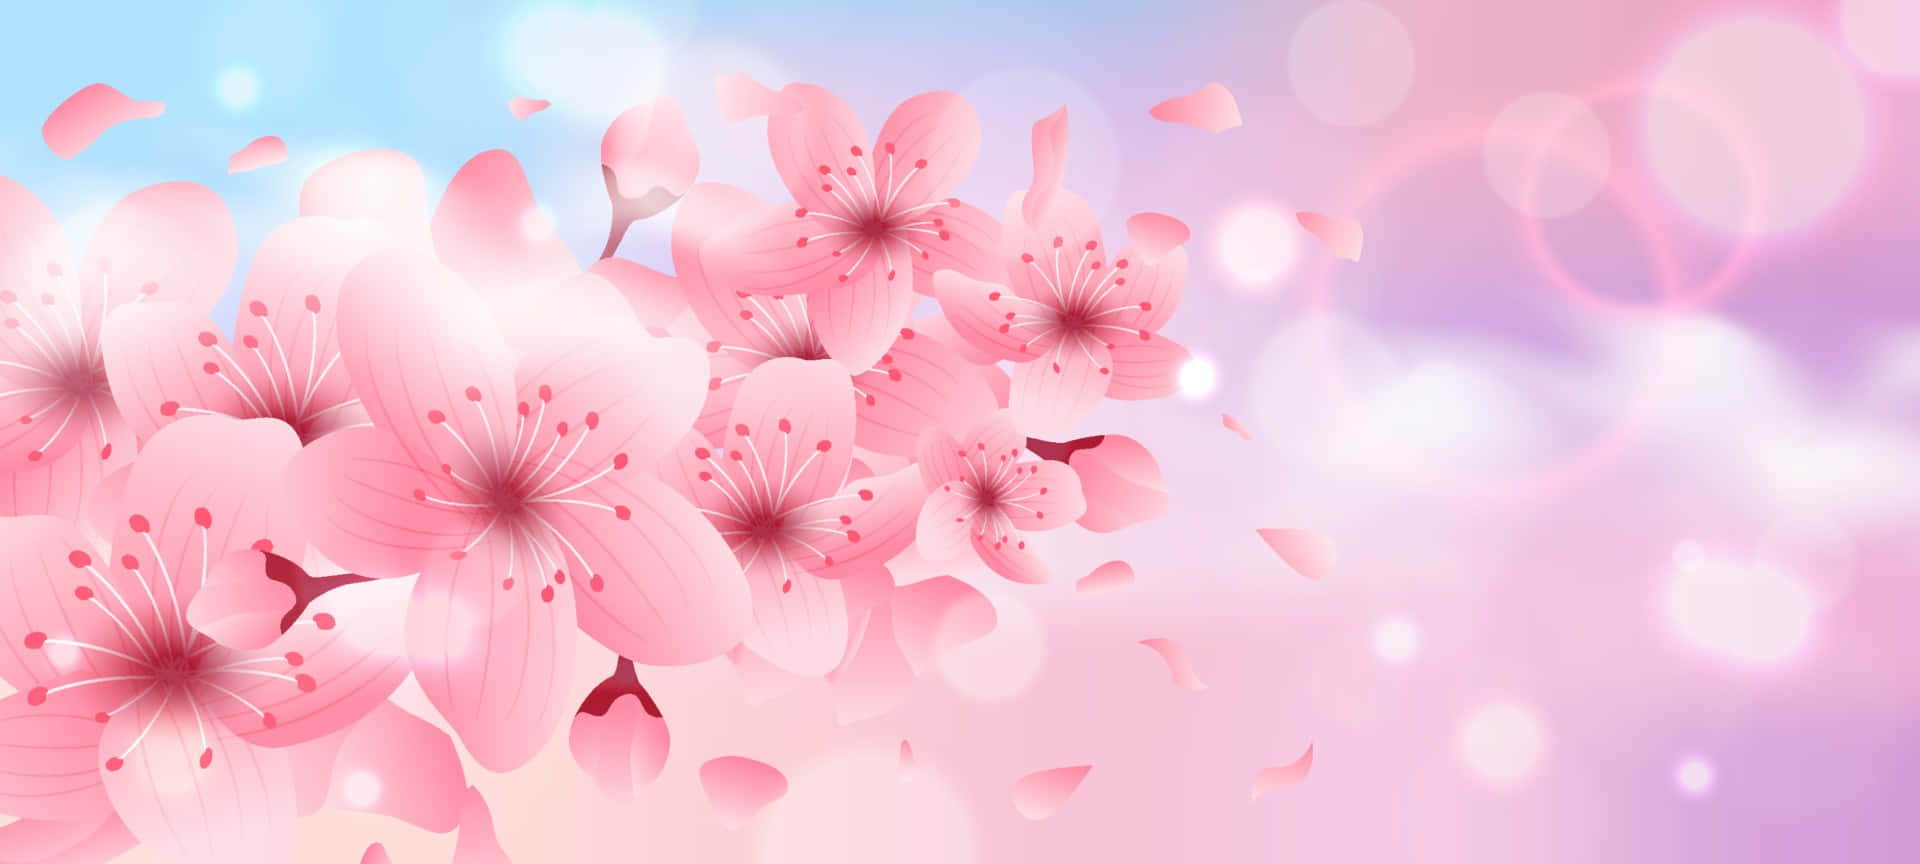 A field of pink cherry blossom trees Wallpaper